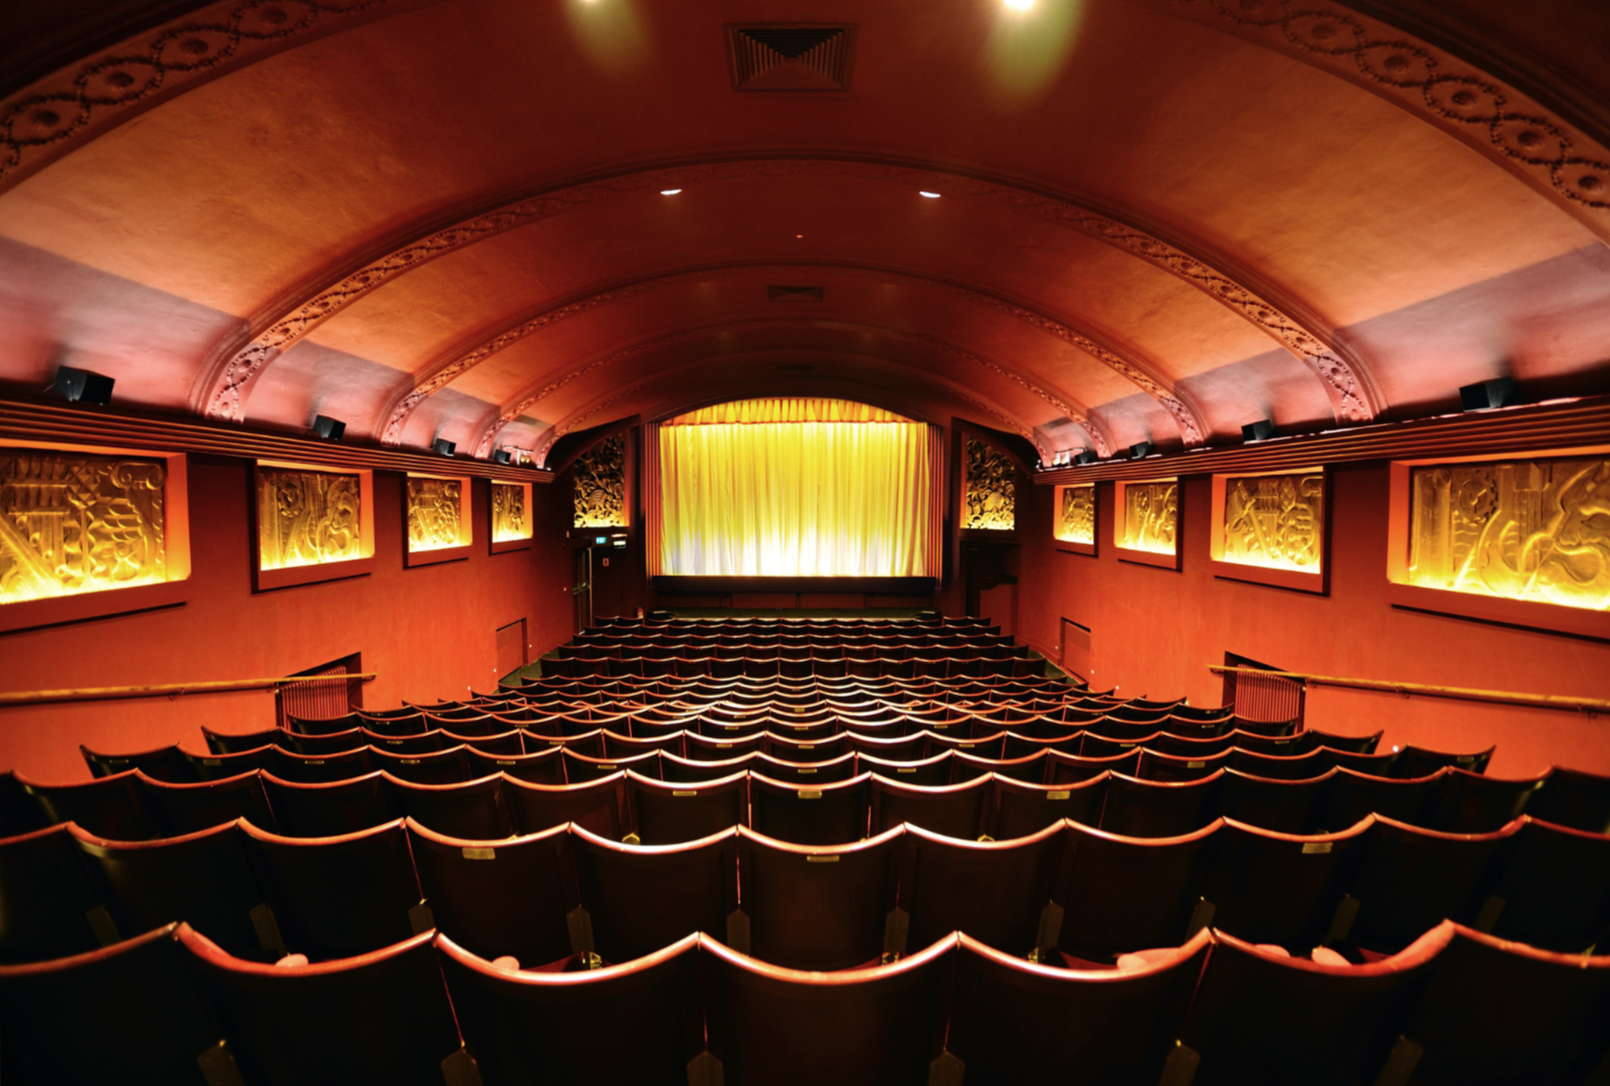 Cinema Therapy: A Theater at the End of the World